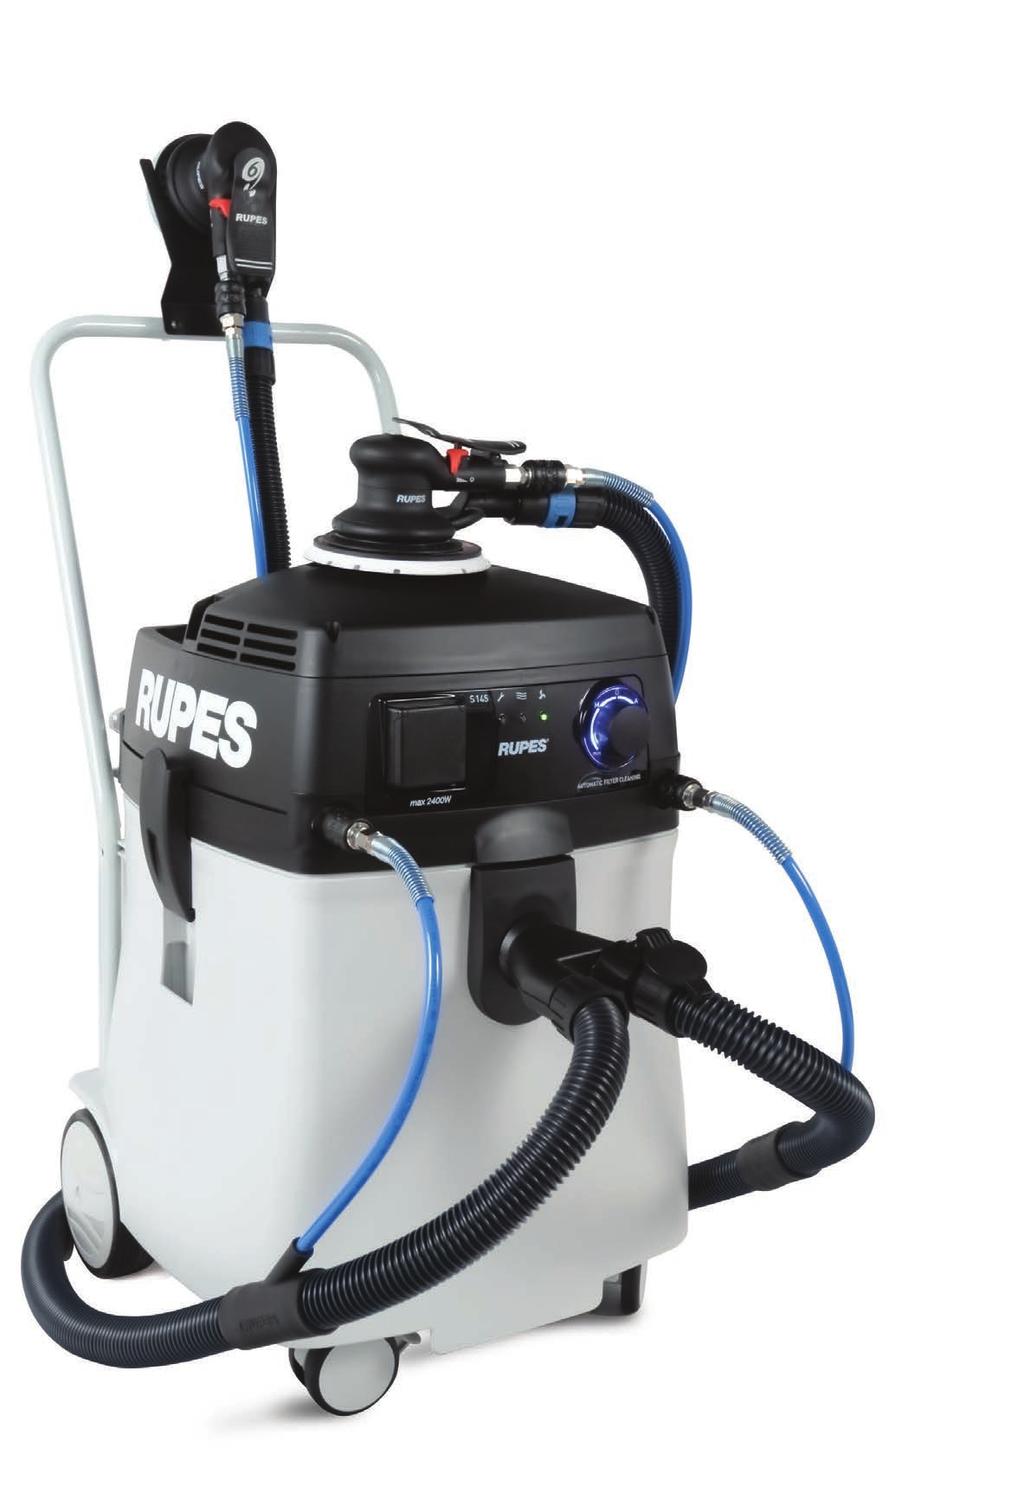 WHAT CAN THE RUPES S145 MOBILE DUST EXTRACTION SYSTEM DO FOR YOU?